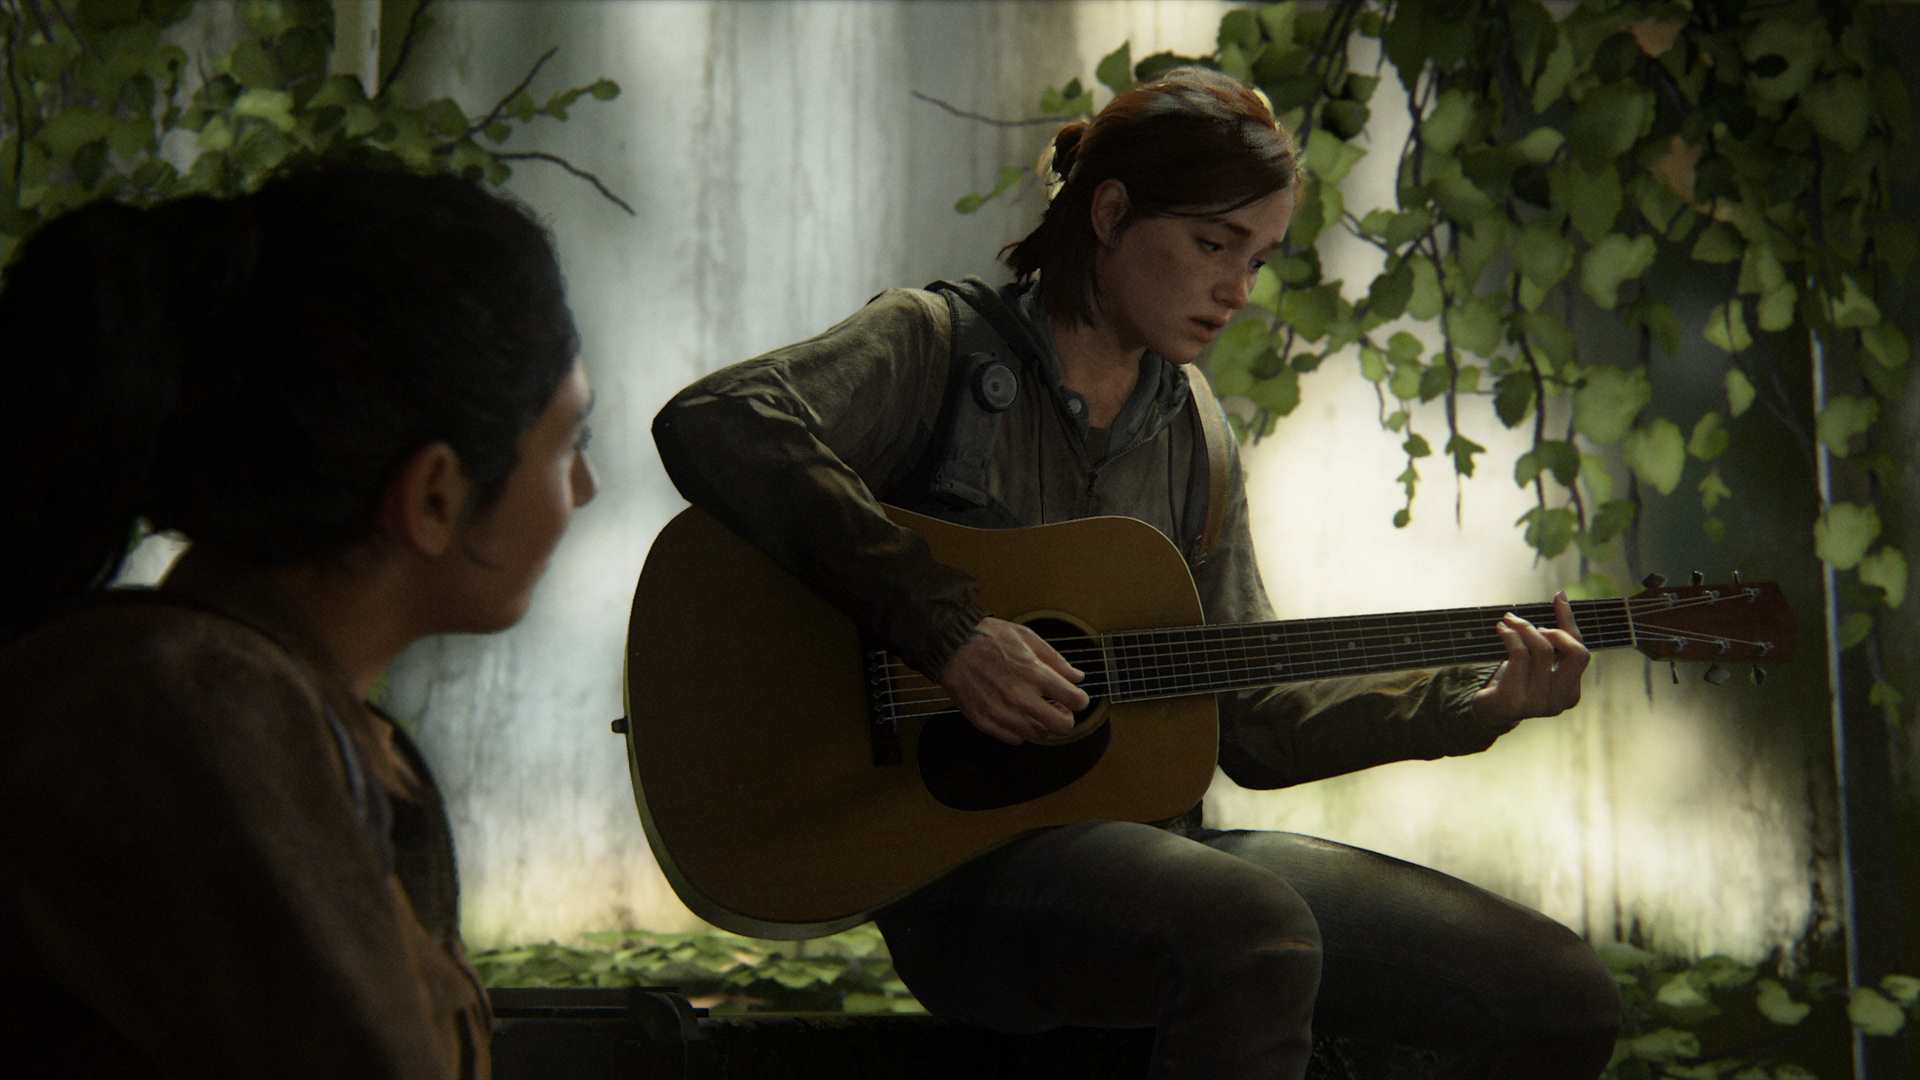 The Last Of Us Part 2: Every Easter Egg And Reference We've Found - GameSpot